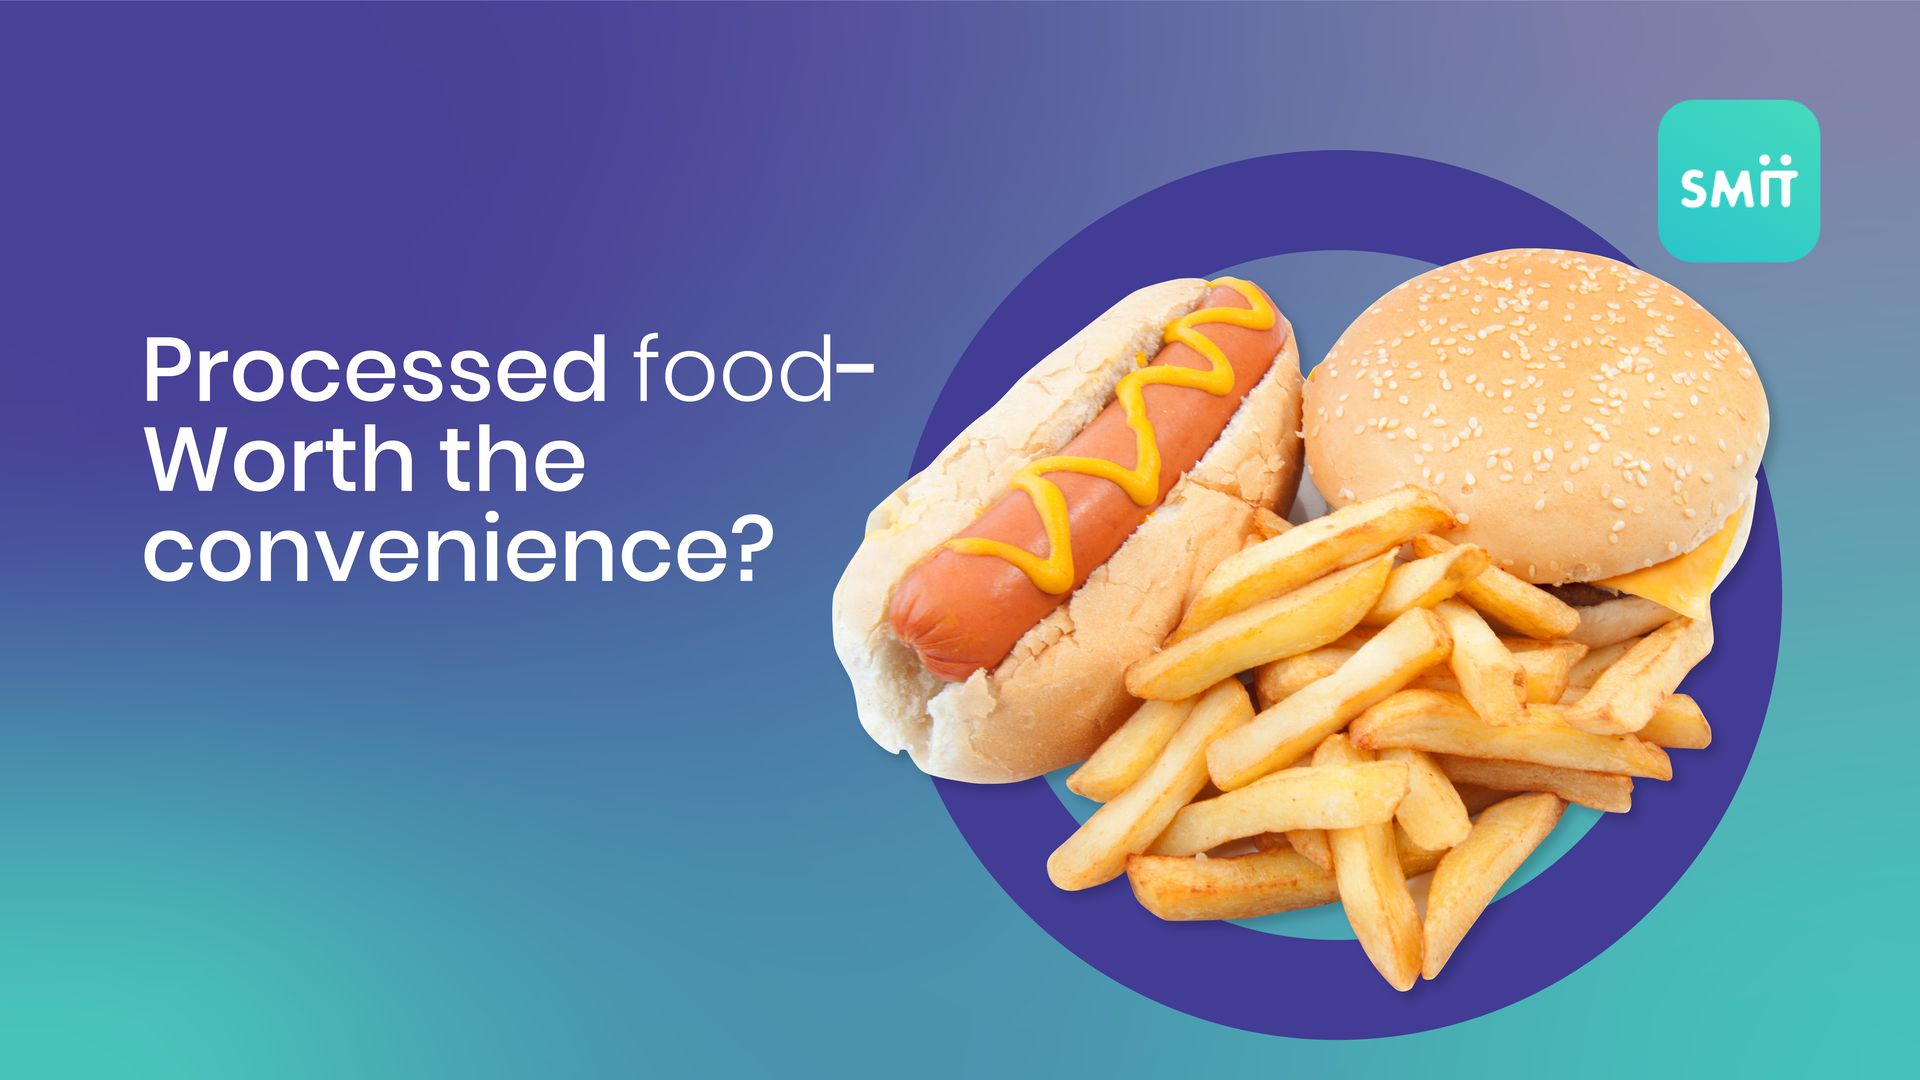 Processed food: Worth the convenience?